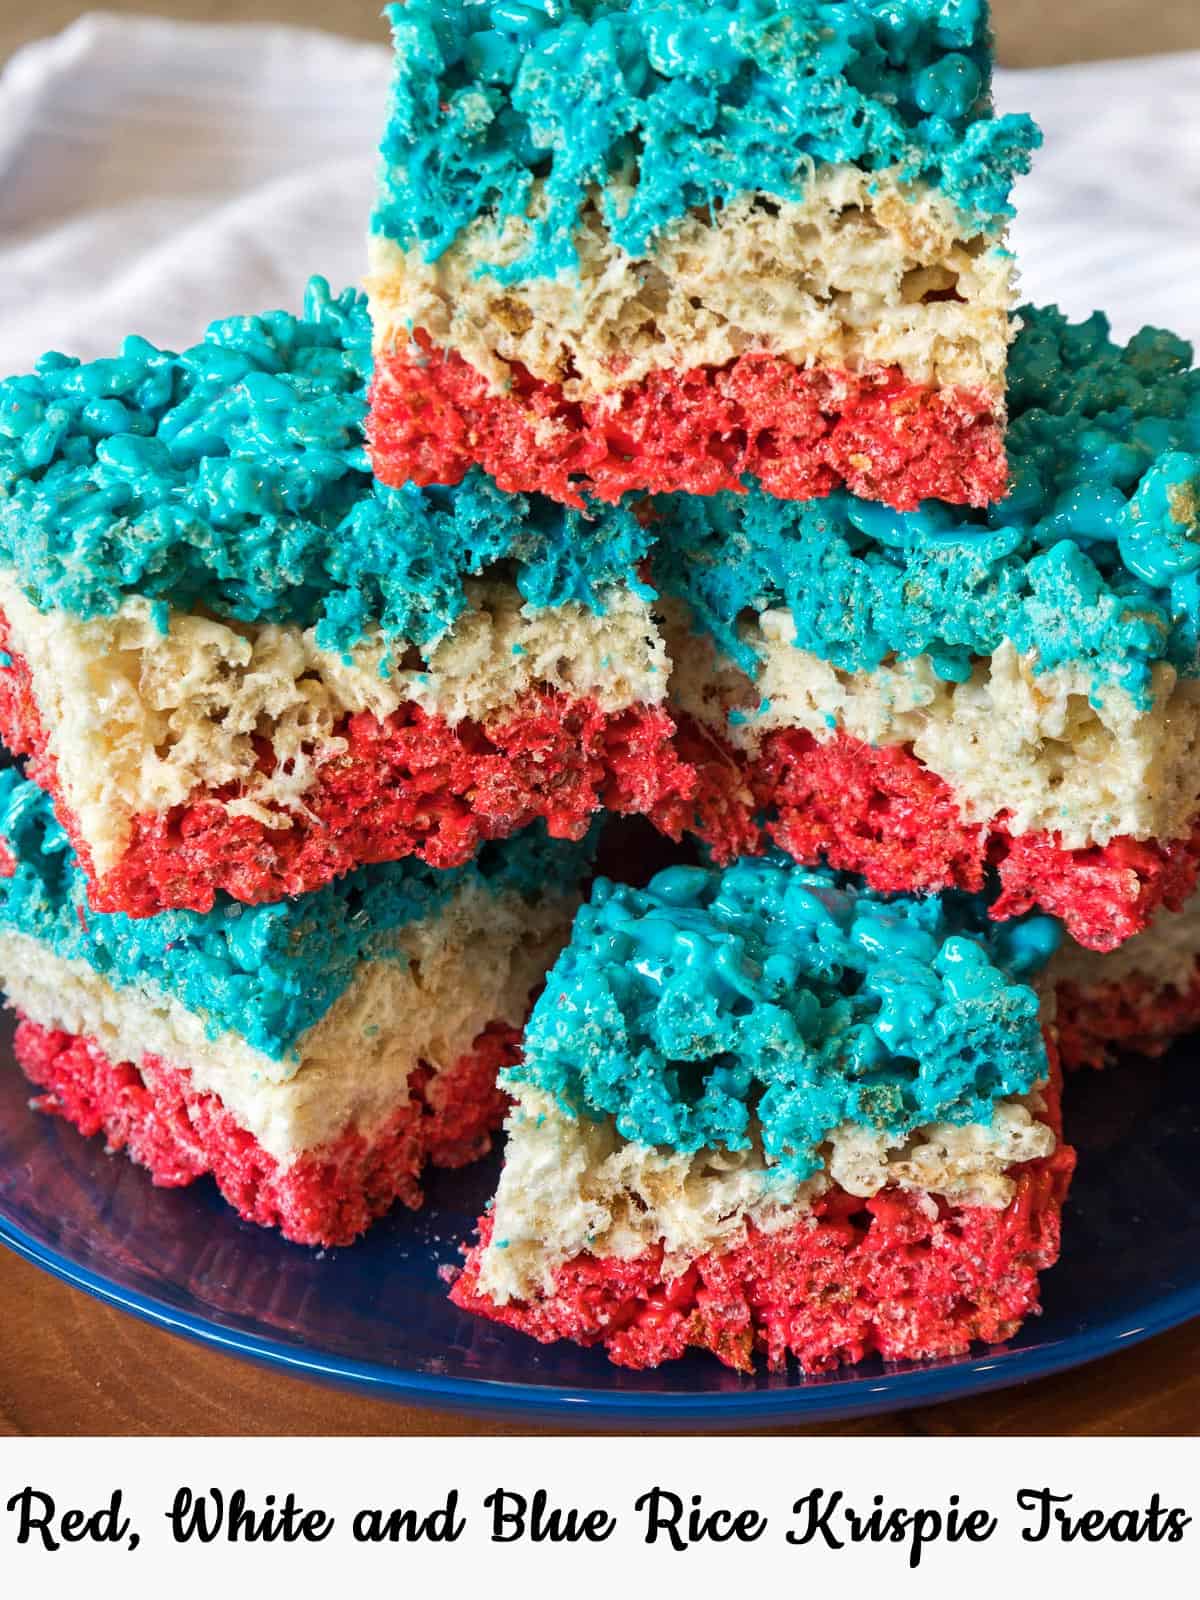 Red, white and blue Rice Krispie Treats layered.